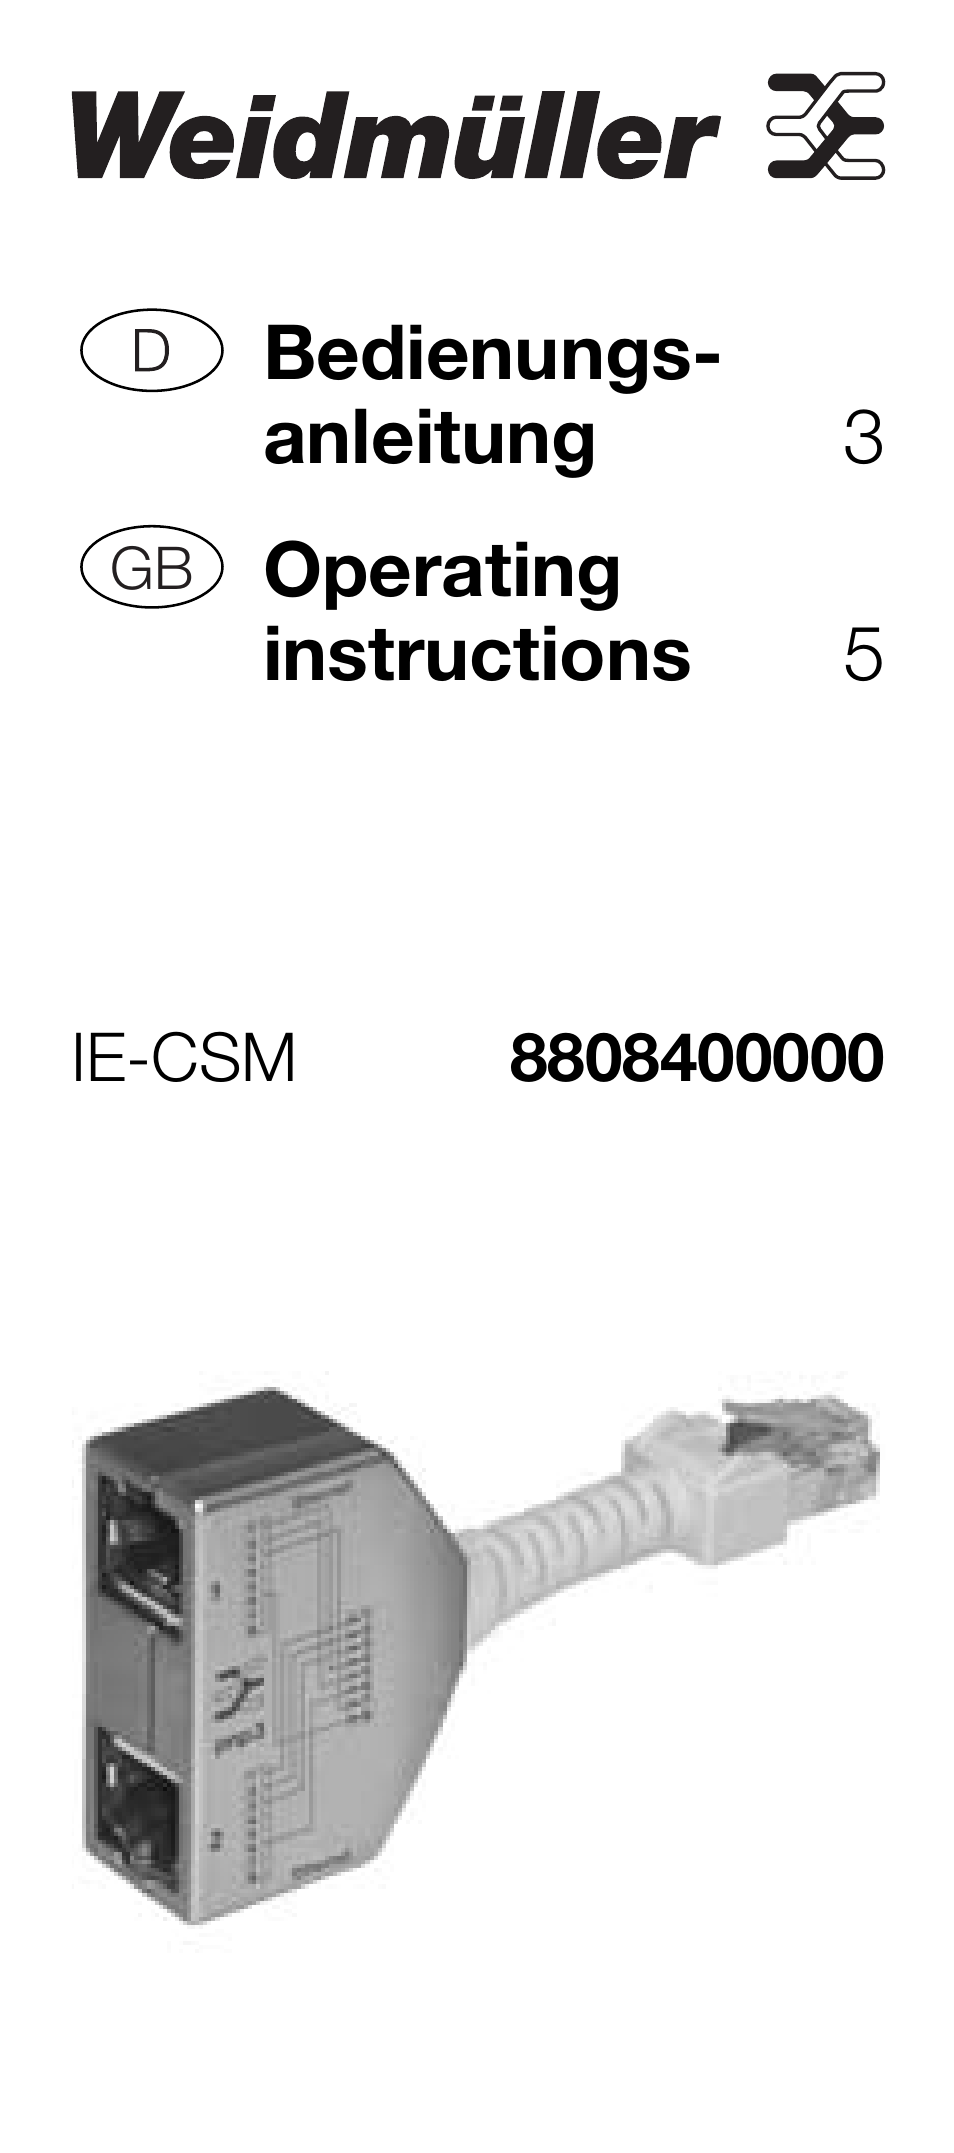 IE-CSM Cable Sharing Module